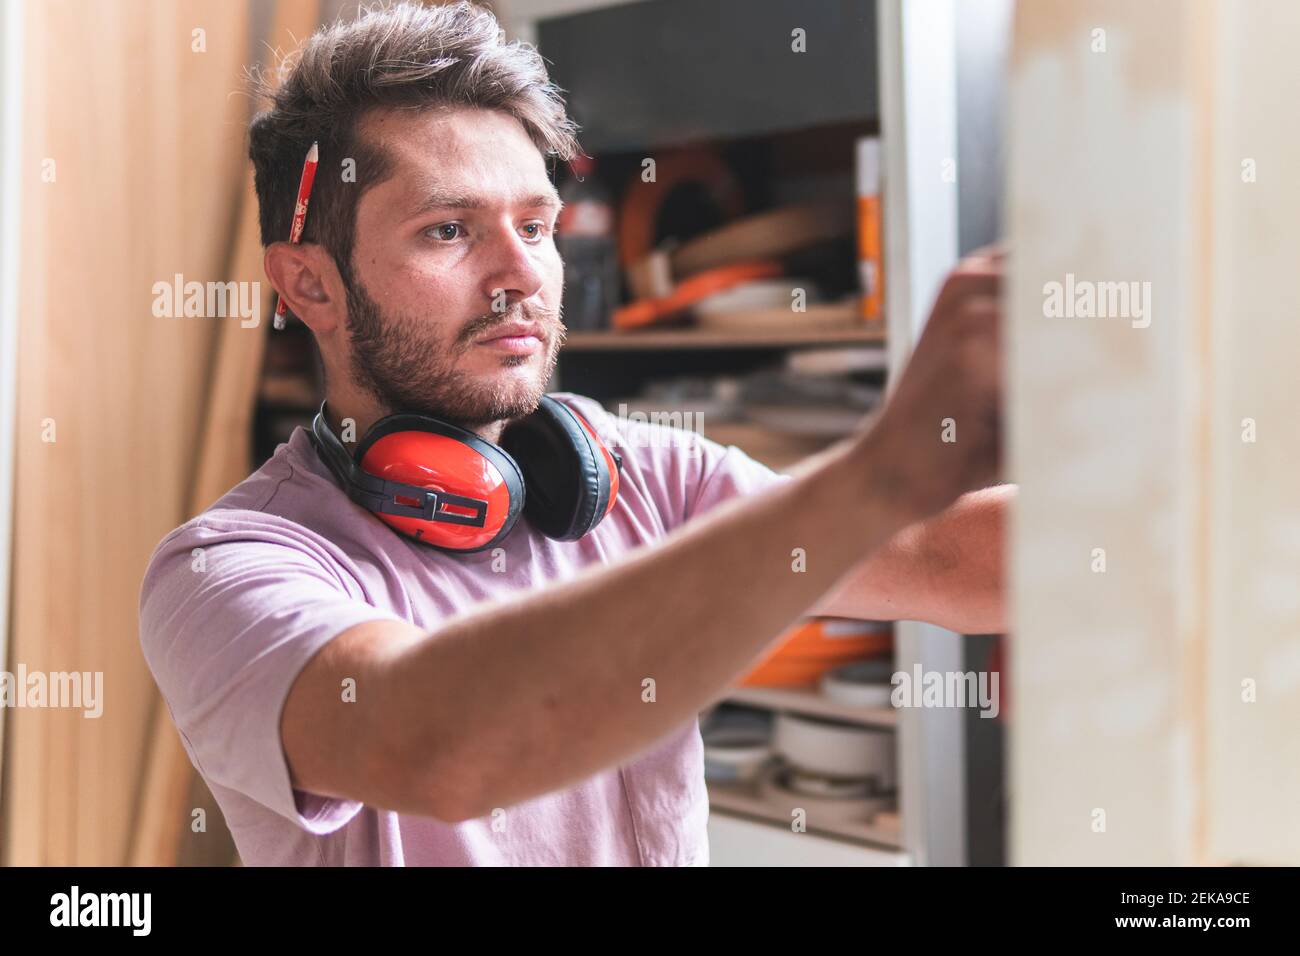 Male craftsperson with ear protectors working in workshop Stock Photo